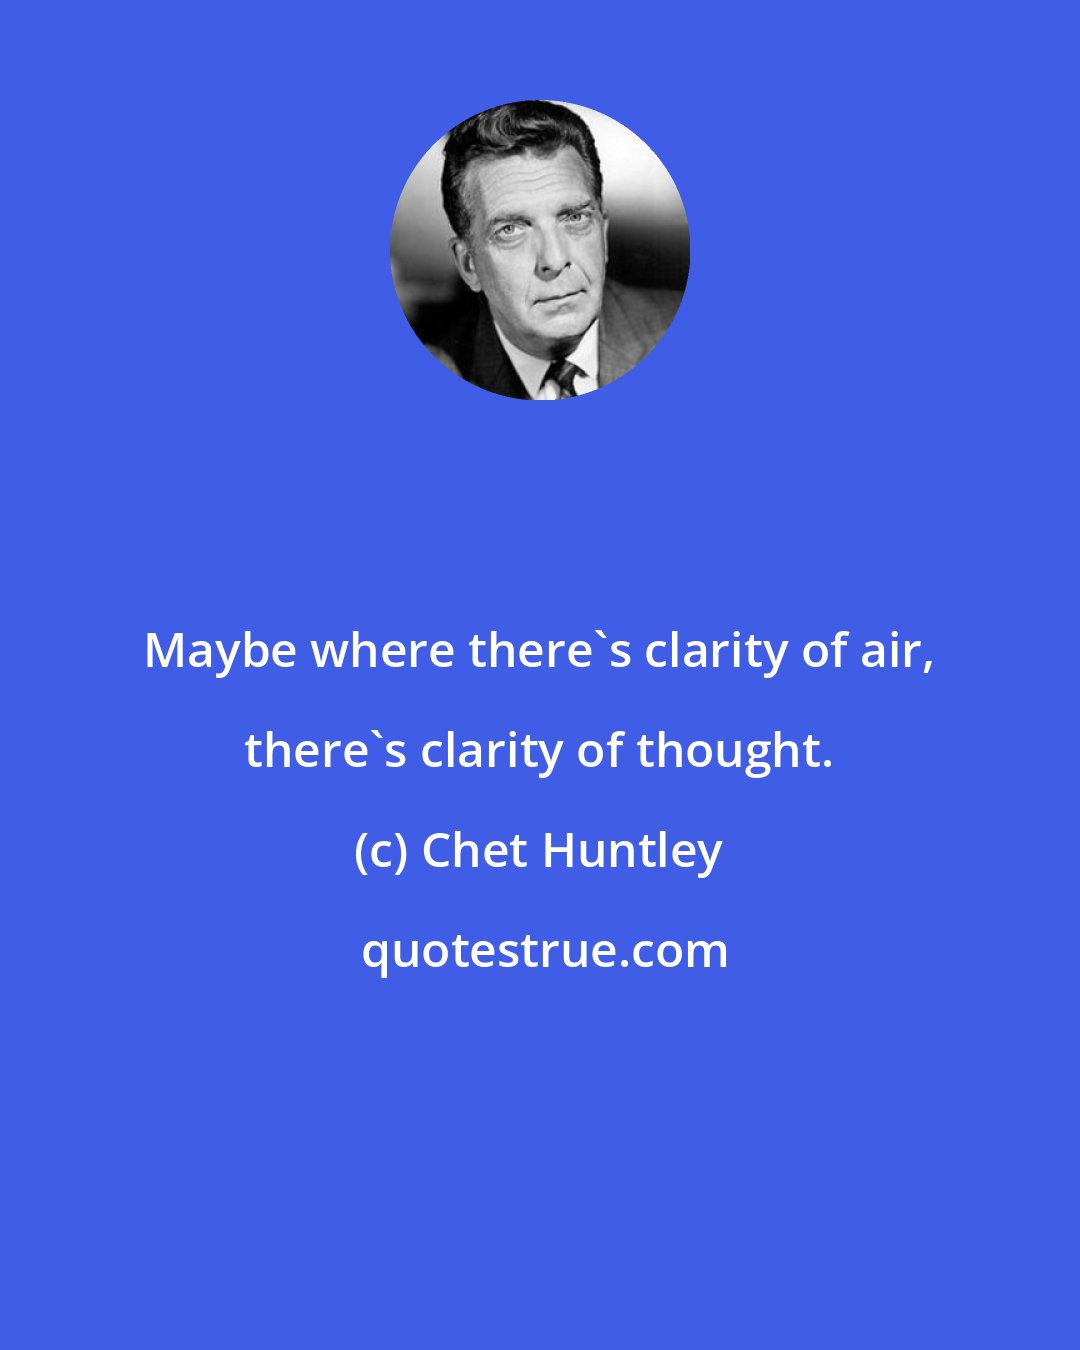 Chet Huntley: Maybe where there's clarity of air, there's clarity of thought.